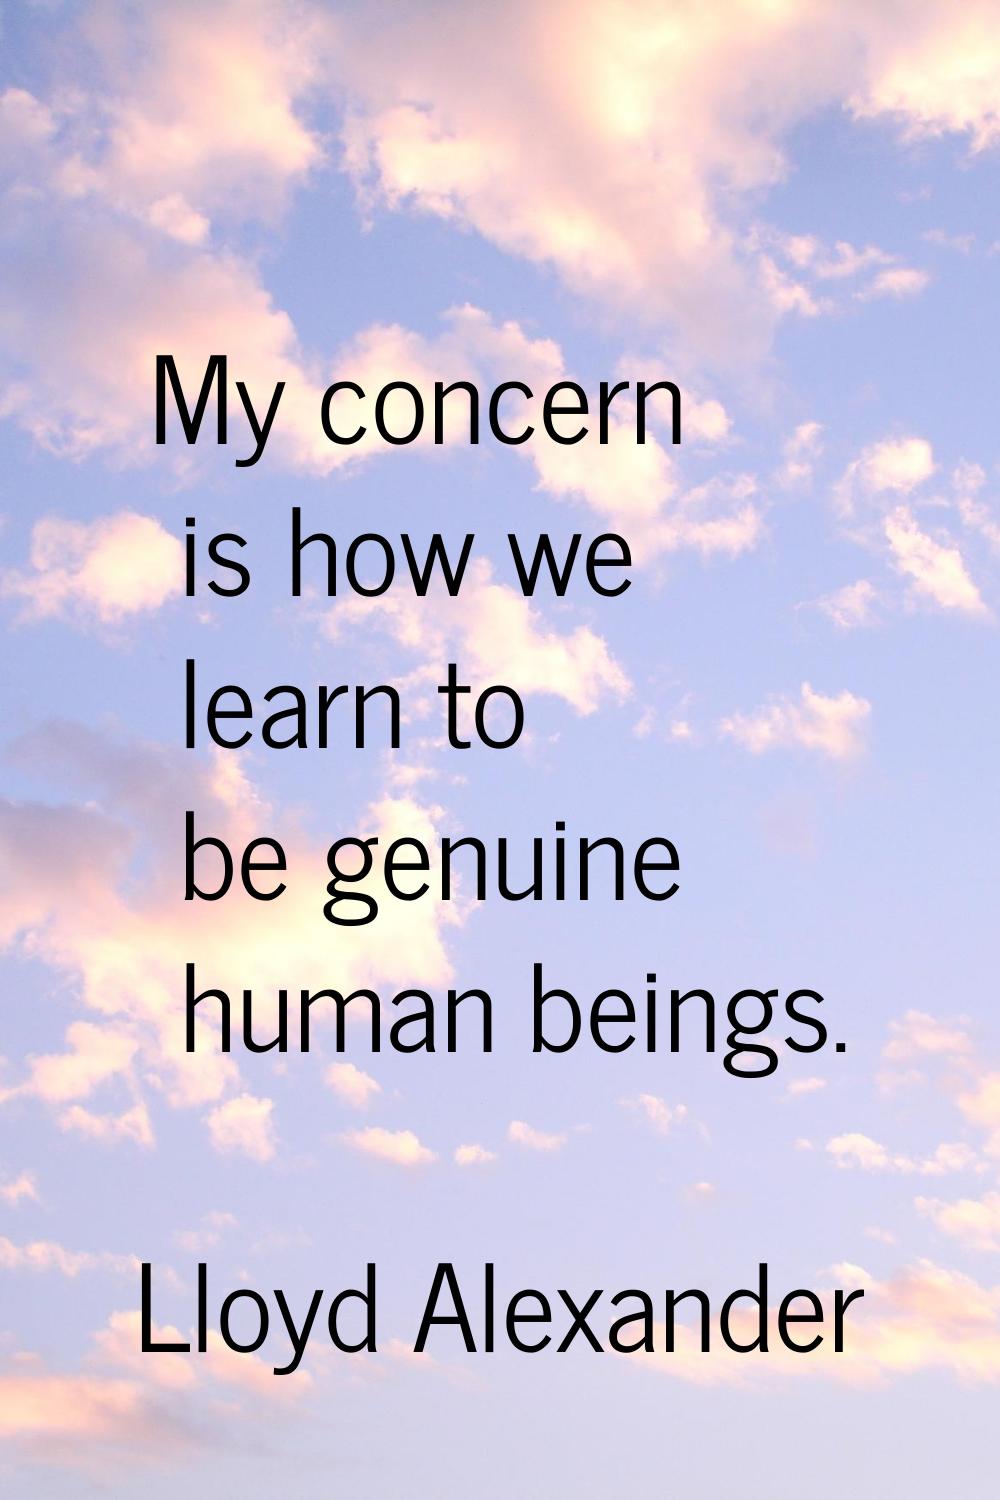 My concern is how we learn to be genuine human beings.